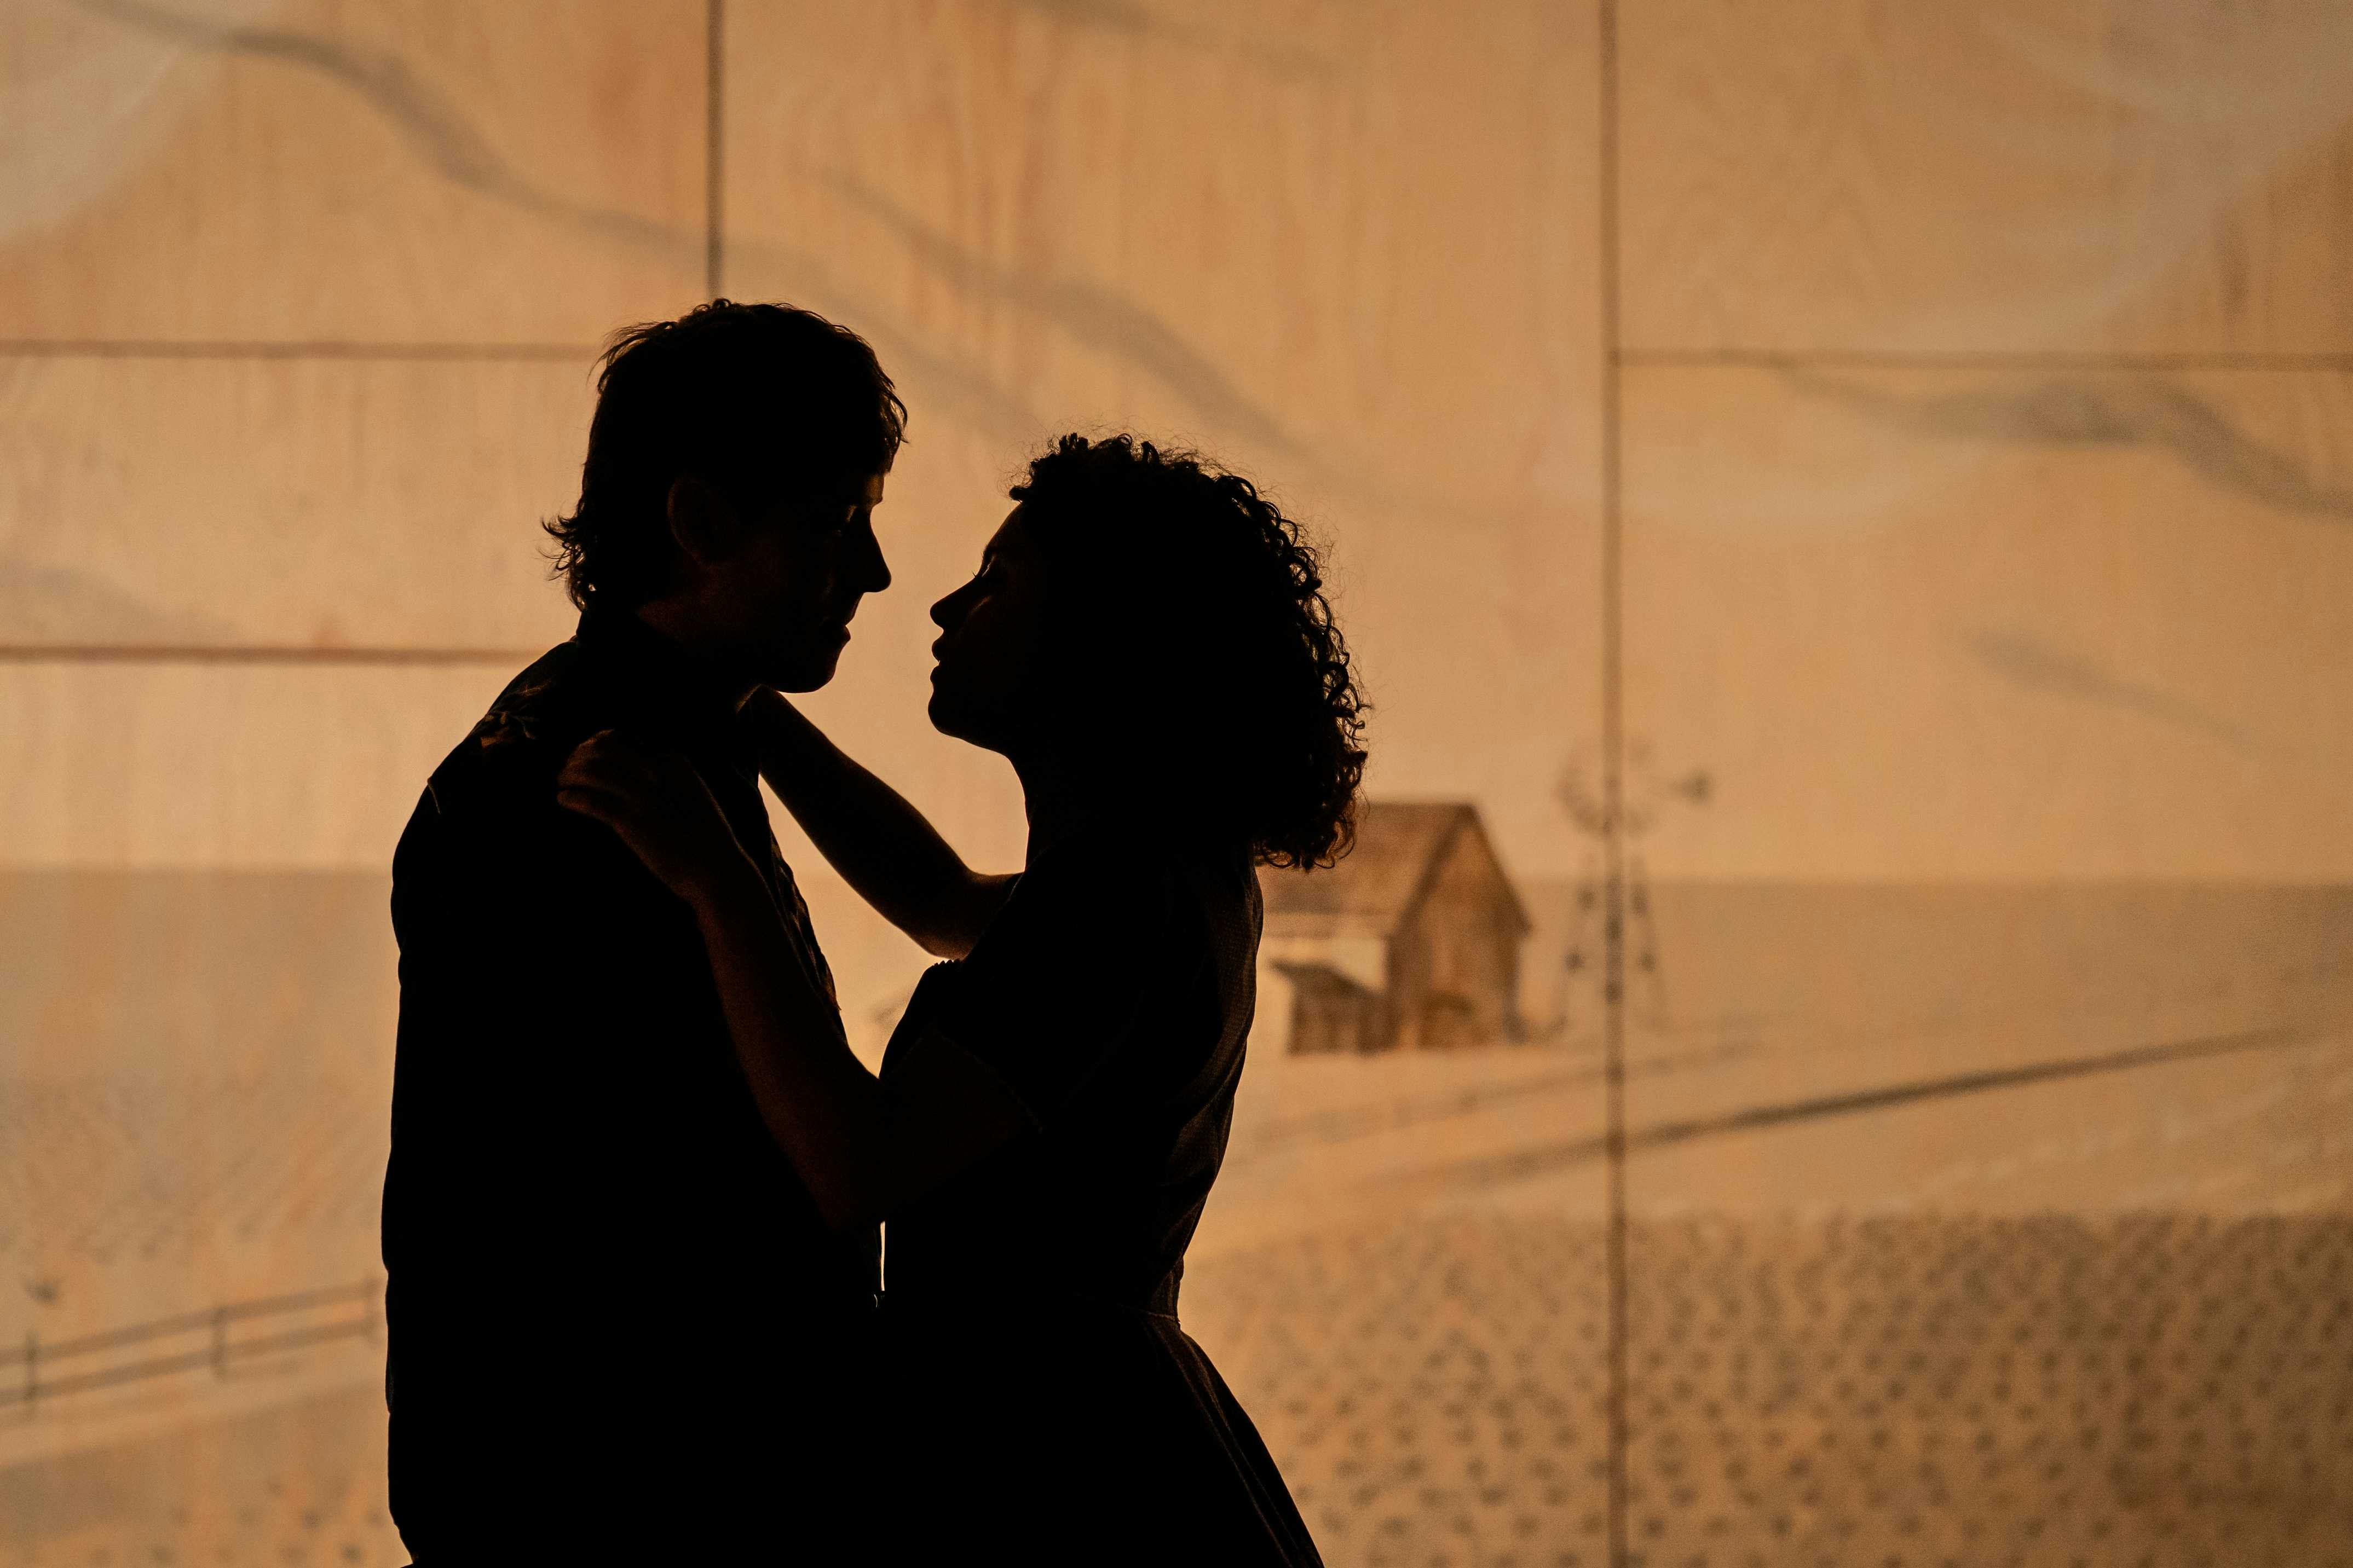 Oklahoma: The Musical - man and woman in silhouette